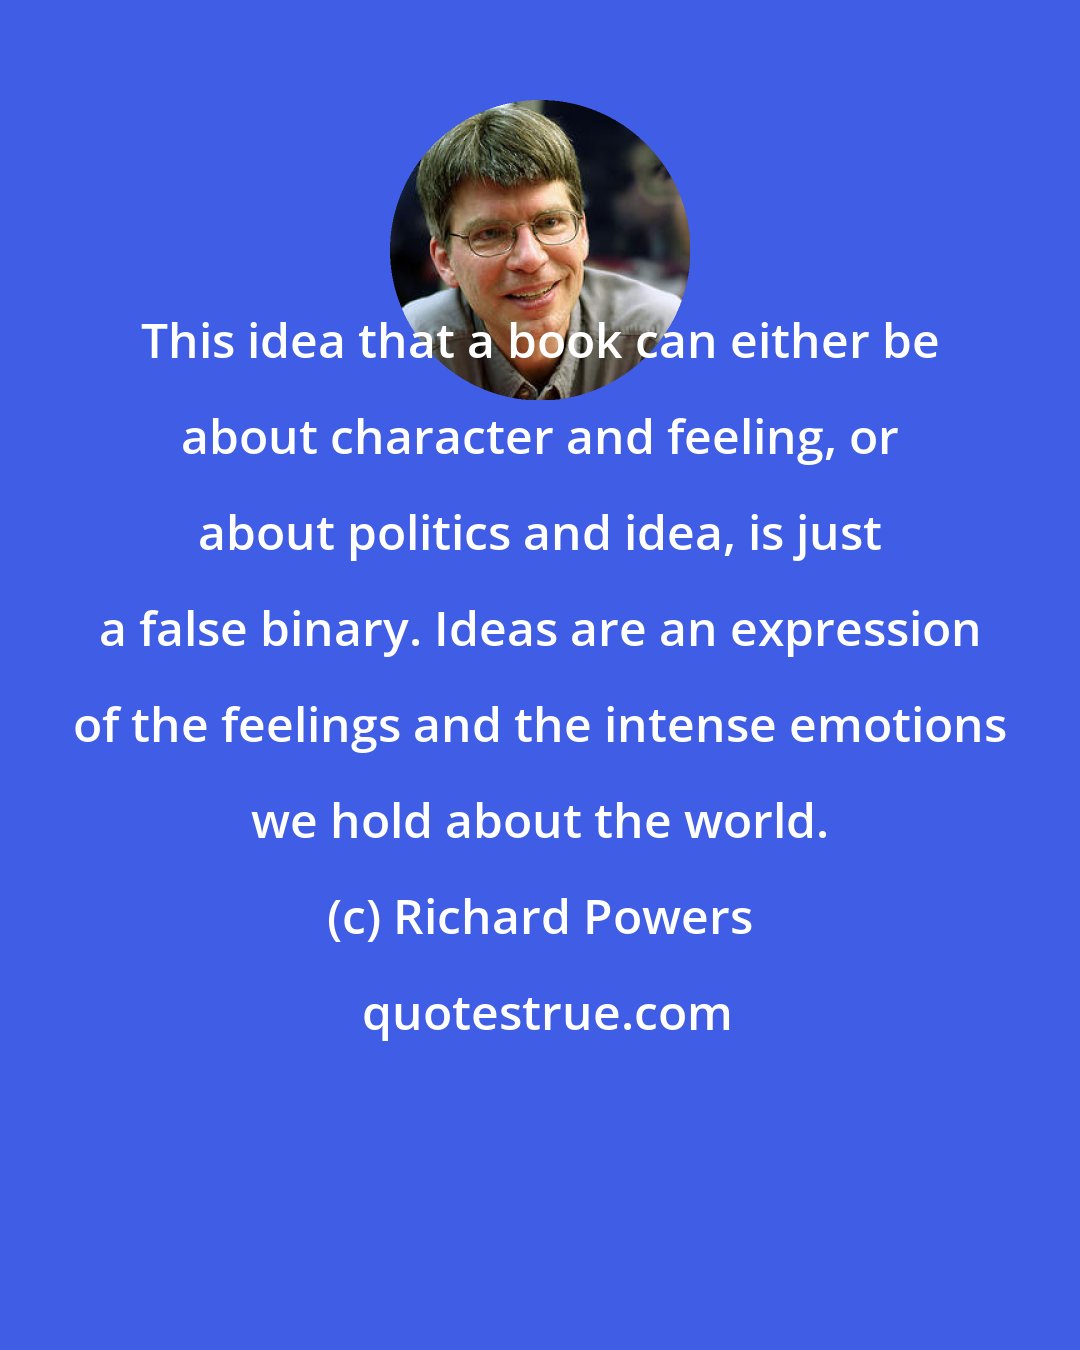 Richard Powers: This idea that a book can either be about character and feeling, or about politics and idea, is just a false binary. Ideas are an expression of the feelings and the intense emotions we hold about the world.